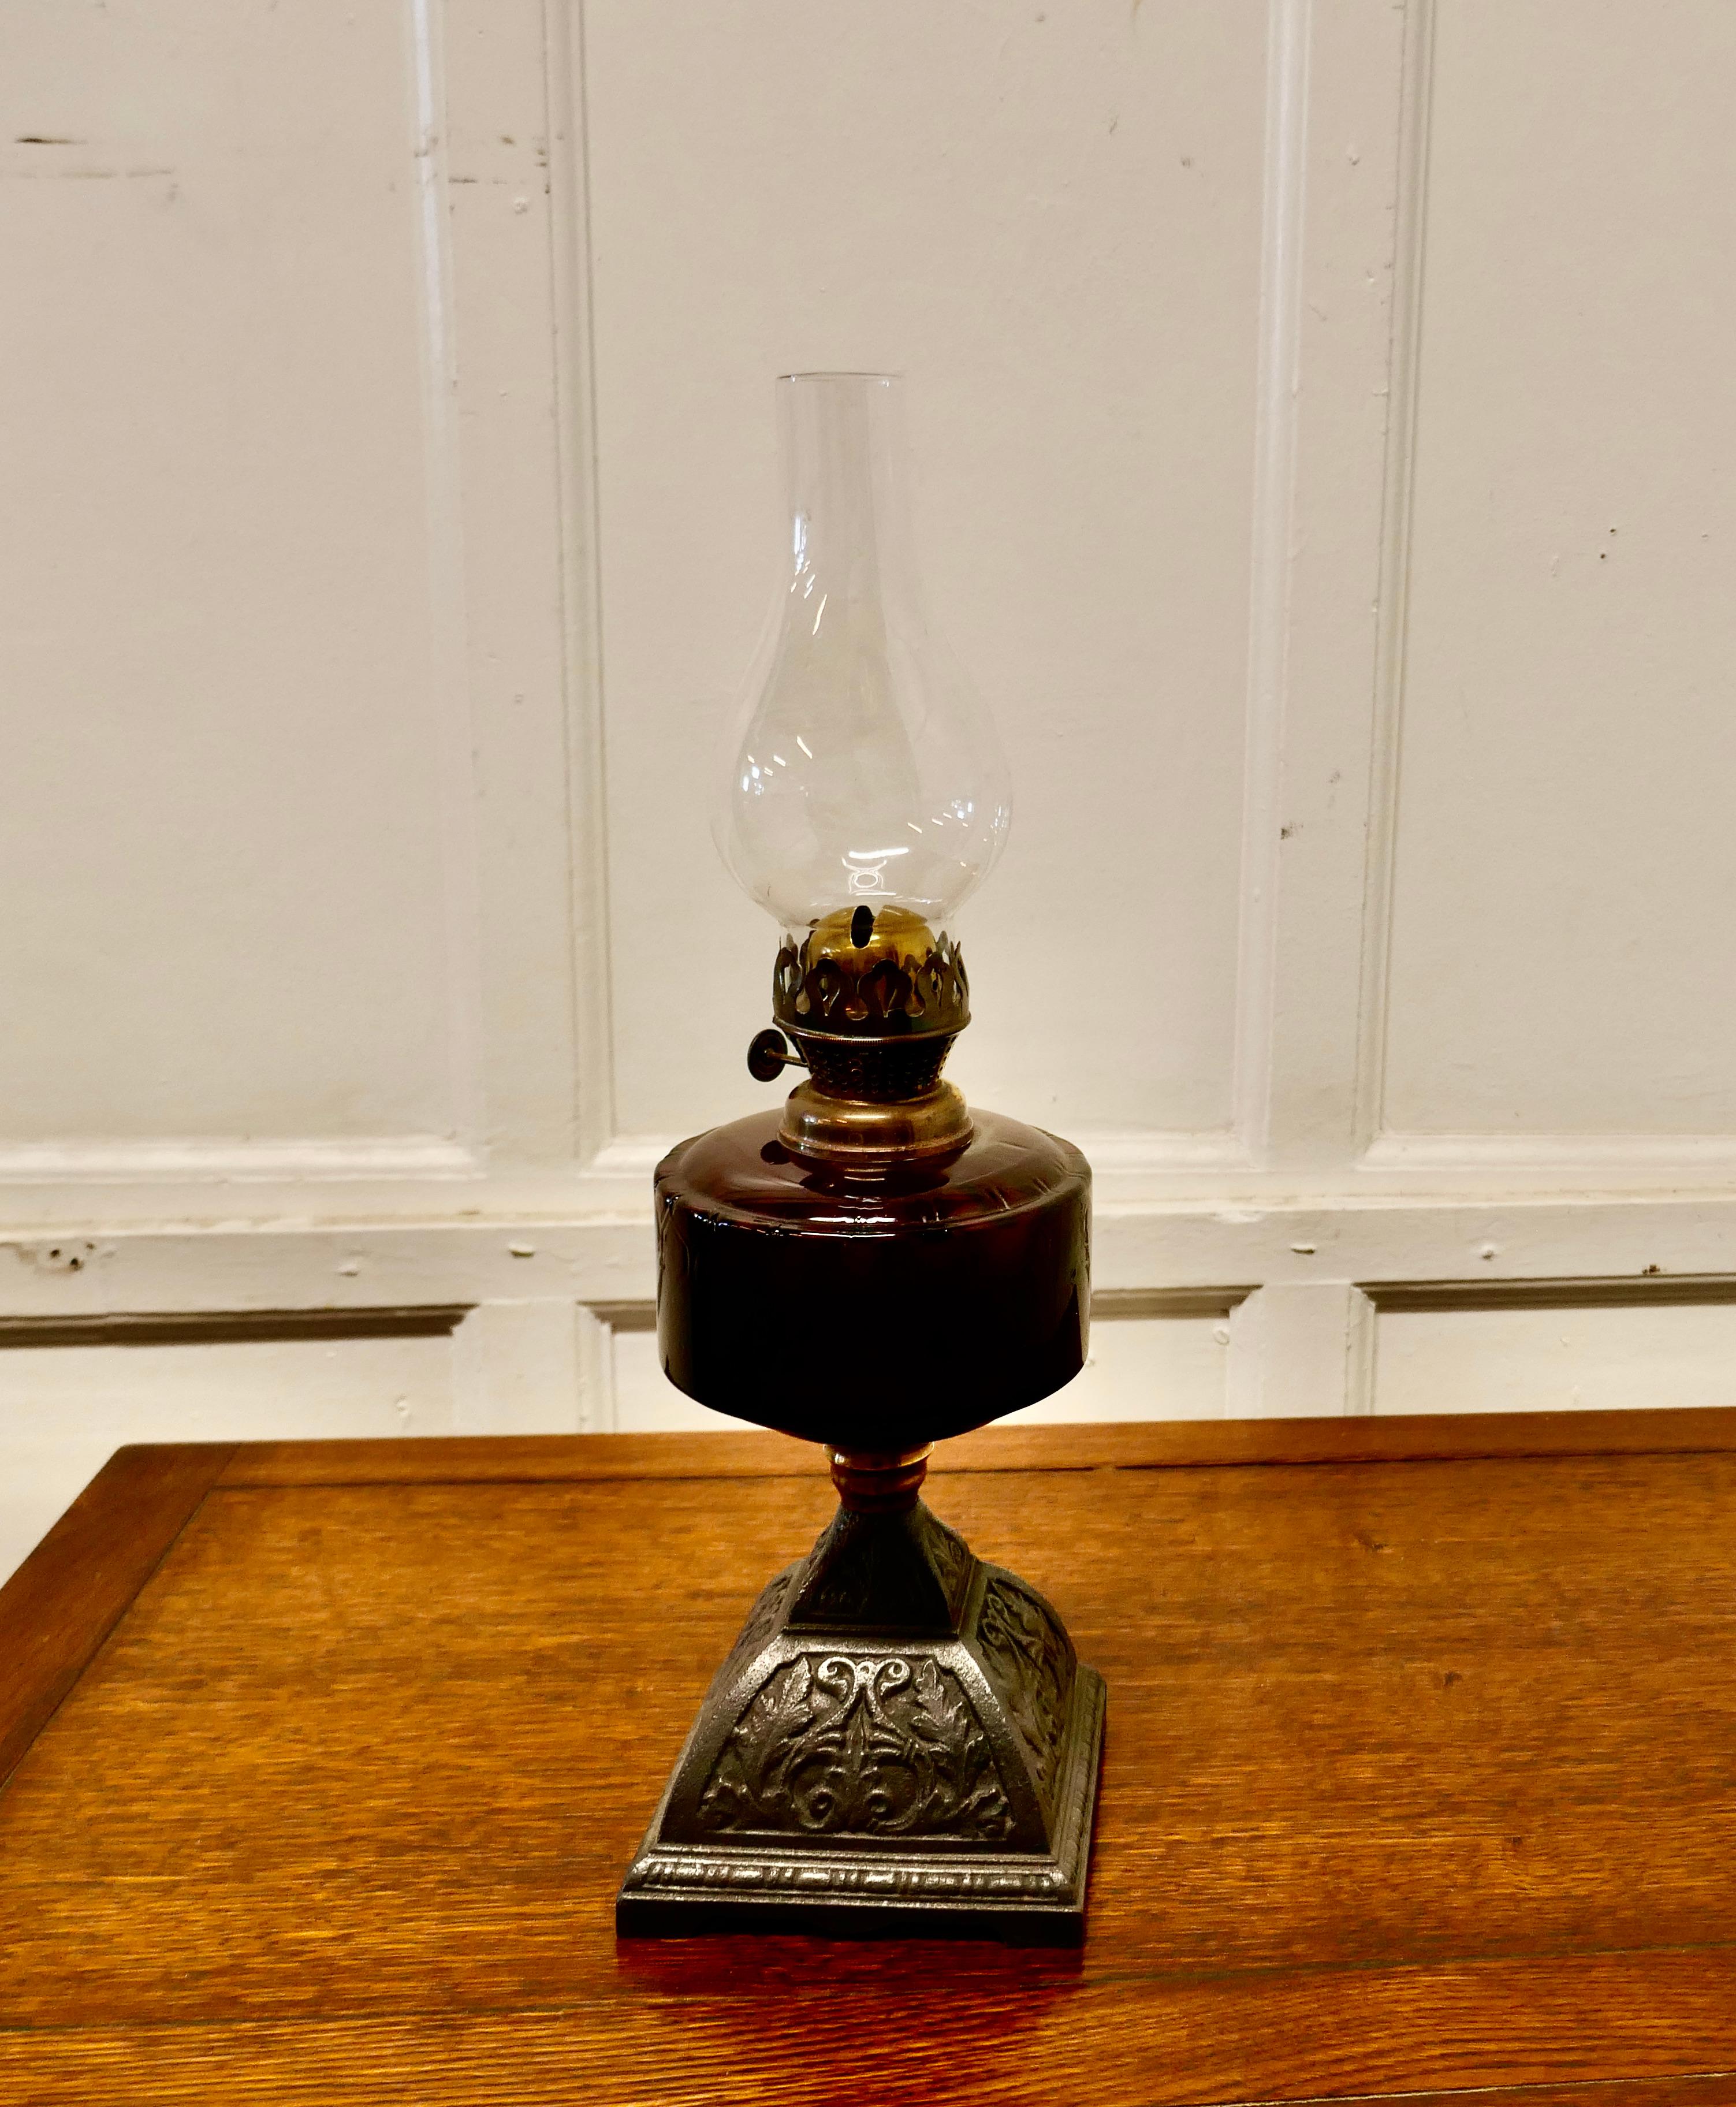 Cranberry glass oil lamp on decorative iron base

A beautiful glass iron lamp set on an Iron base, the lamp is a great looking piece, it has a glass chimney and a burner but I cannot guarantee if it is in working condition 


The lamp is in